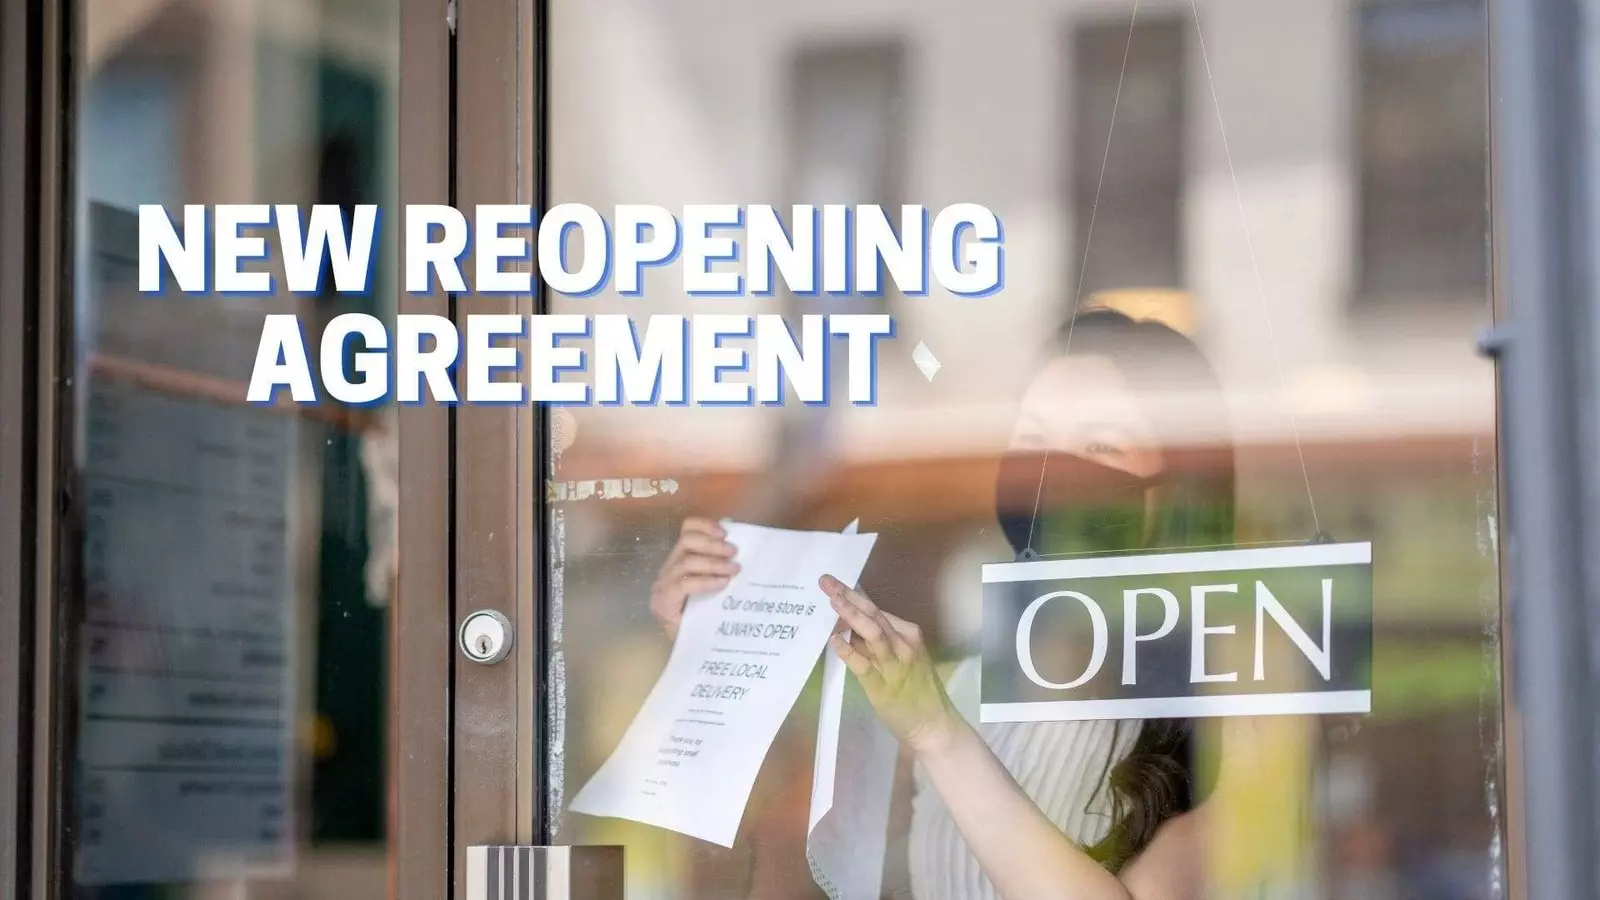 NEW REOPENING AGREEMENT OVERVIEW from 21st April 2021